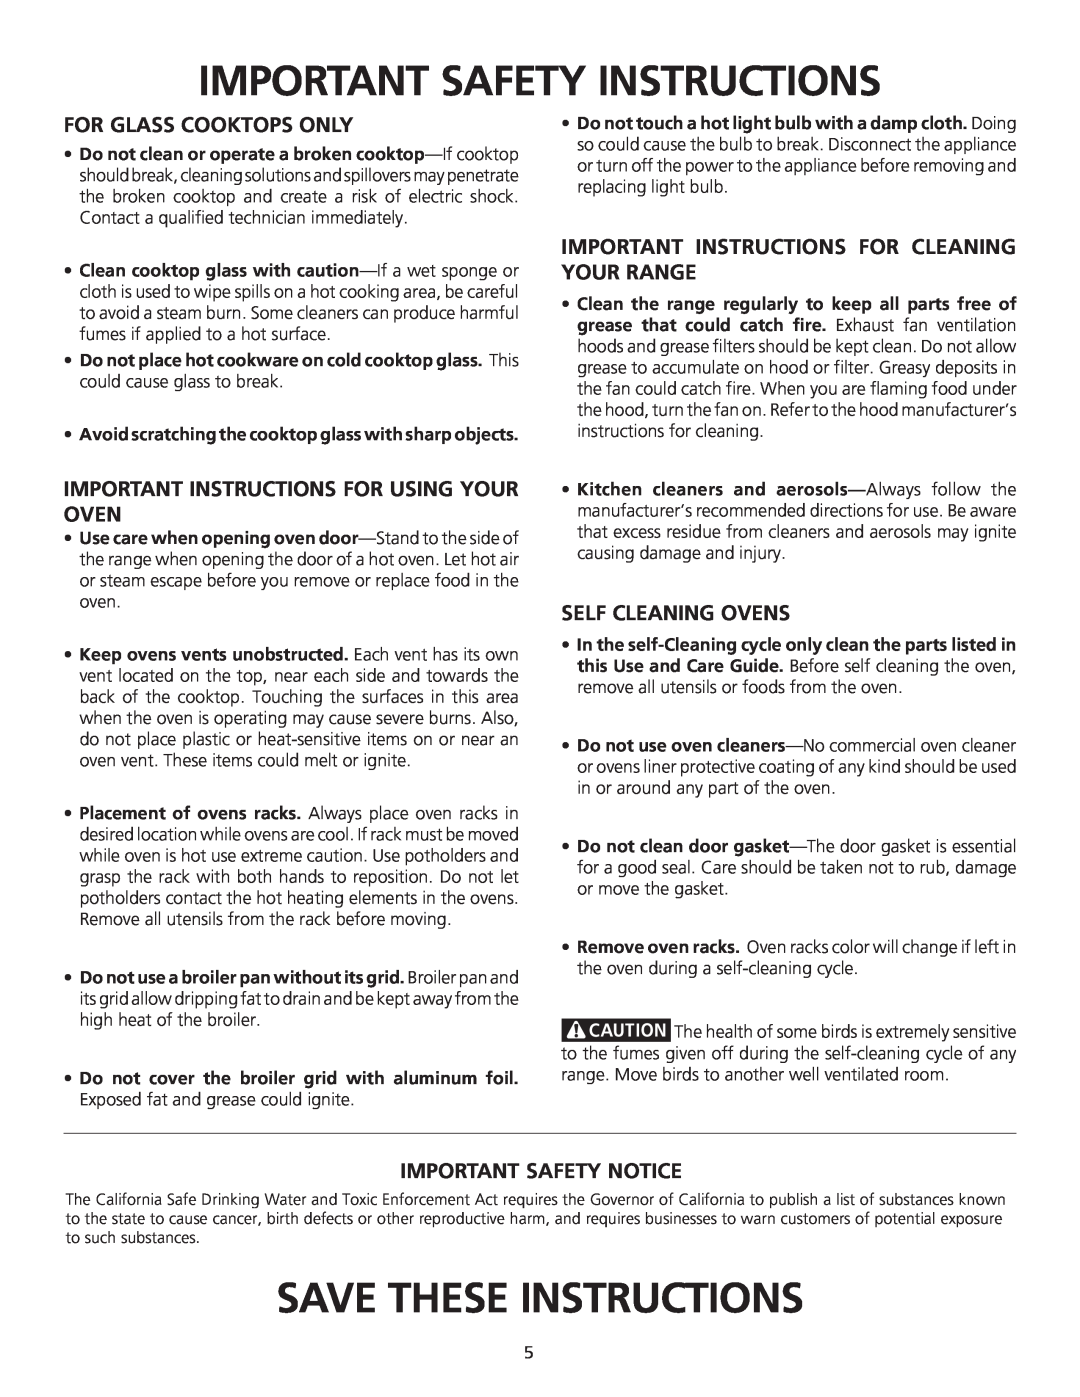 Frigidaire 318200710 Save These Instructions, For Glass Cooktops Only, Important Instructions For Using Your Oven 